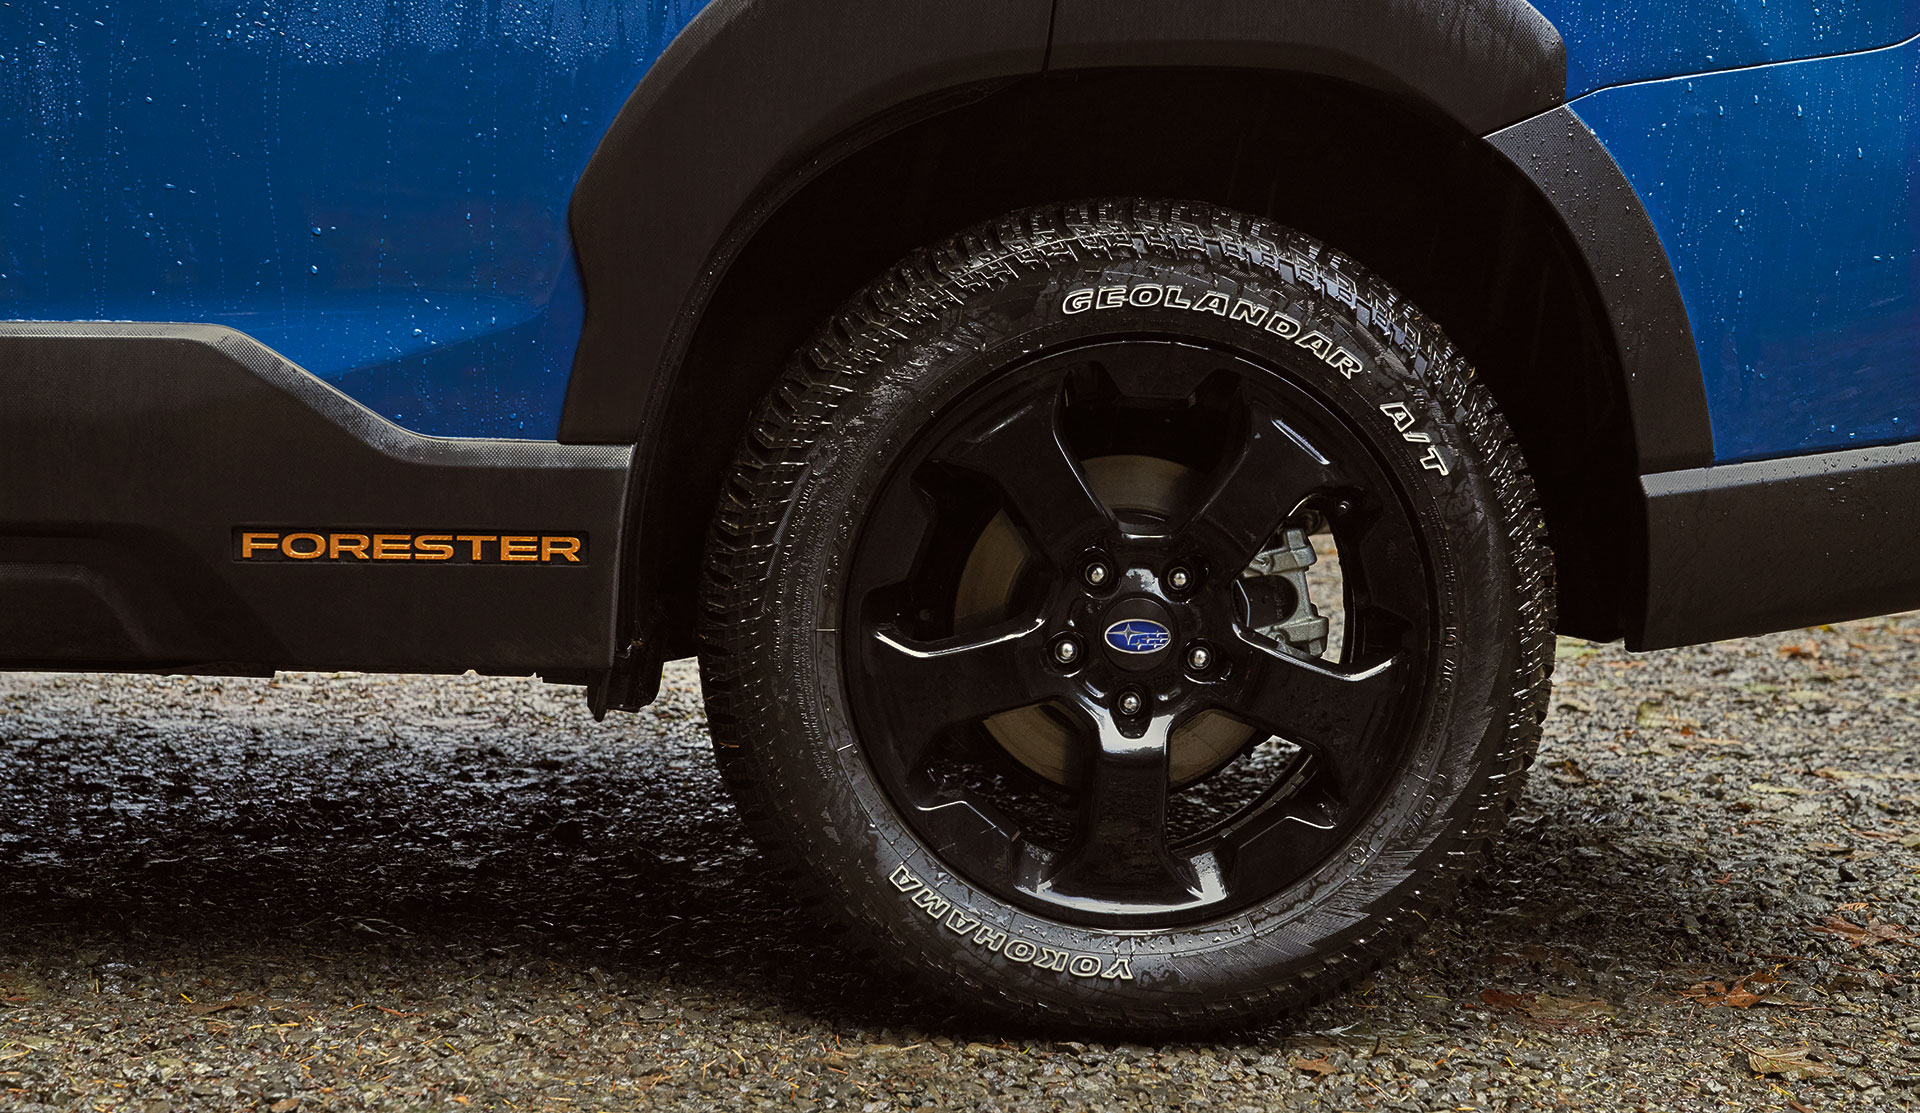 Closeup shot of the Foreester Wilderness black painted wheel.